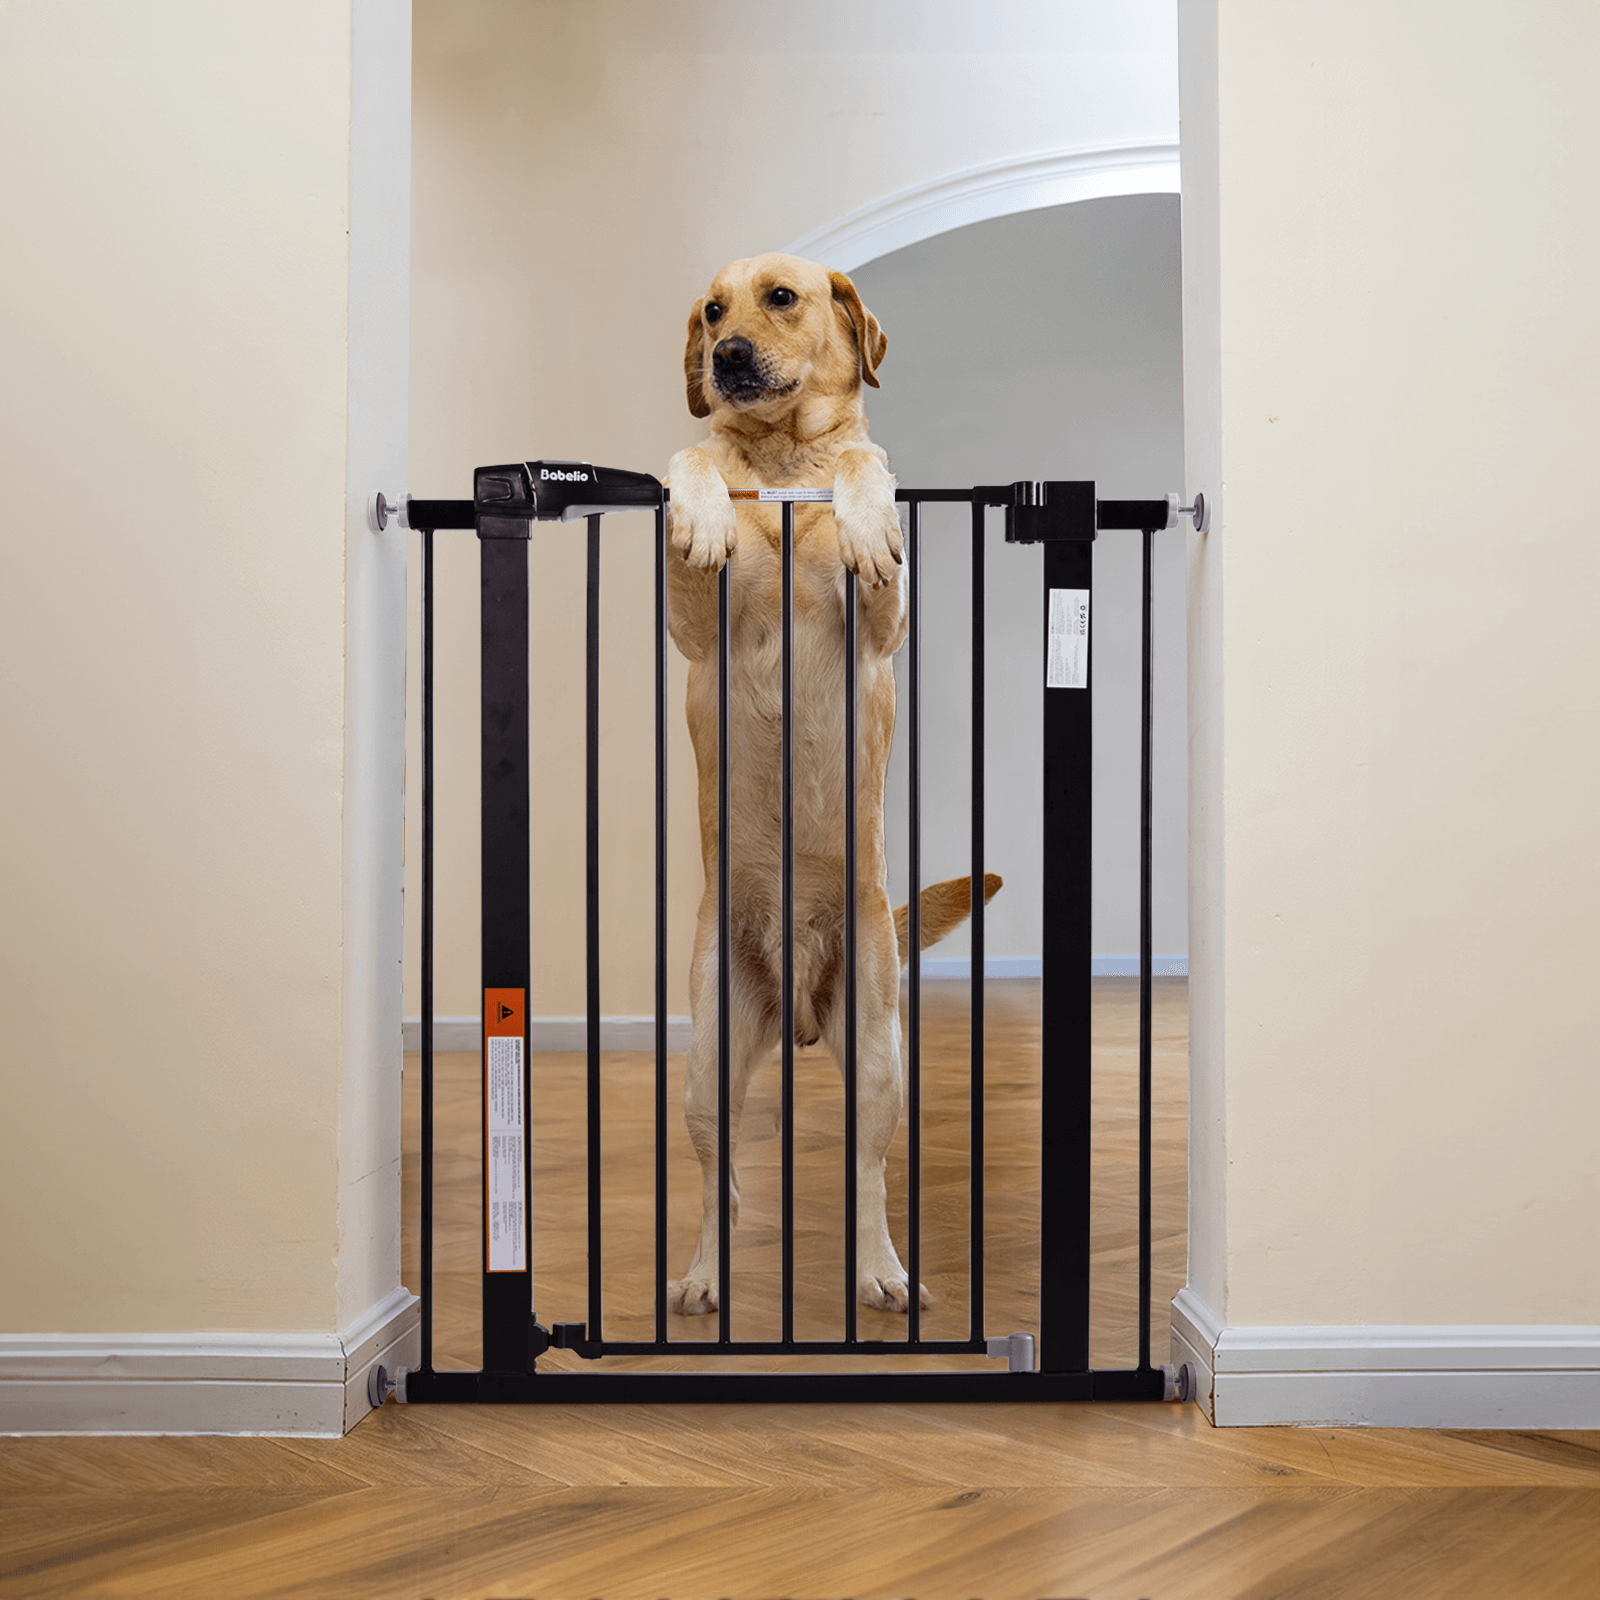 Babelio 36" High Adjustable Metal Safety Gate – Auto-Close, Easy Install, 26-40" Wide, Ideal for Babies & Pets, Black